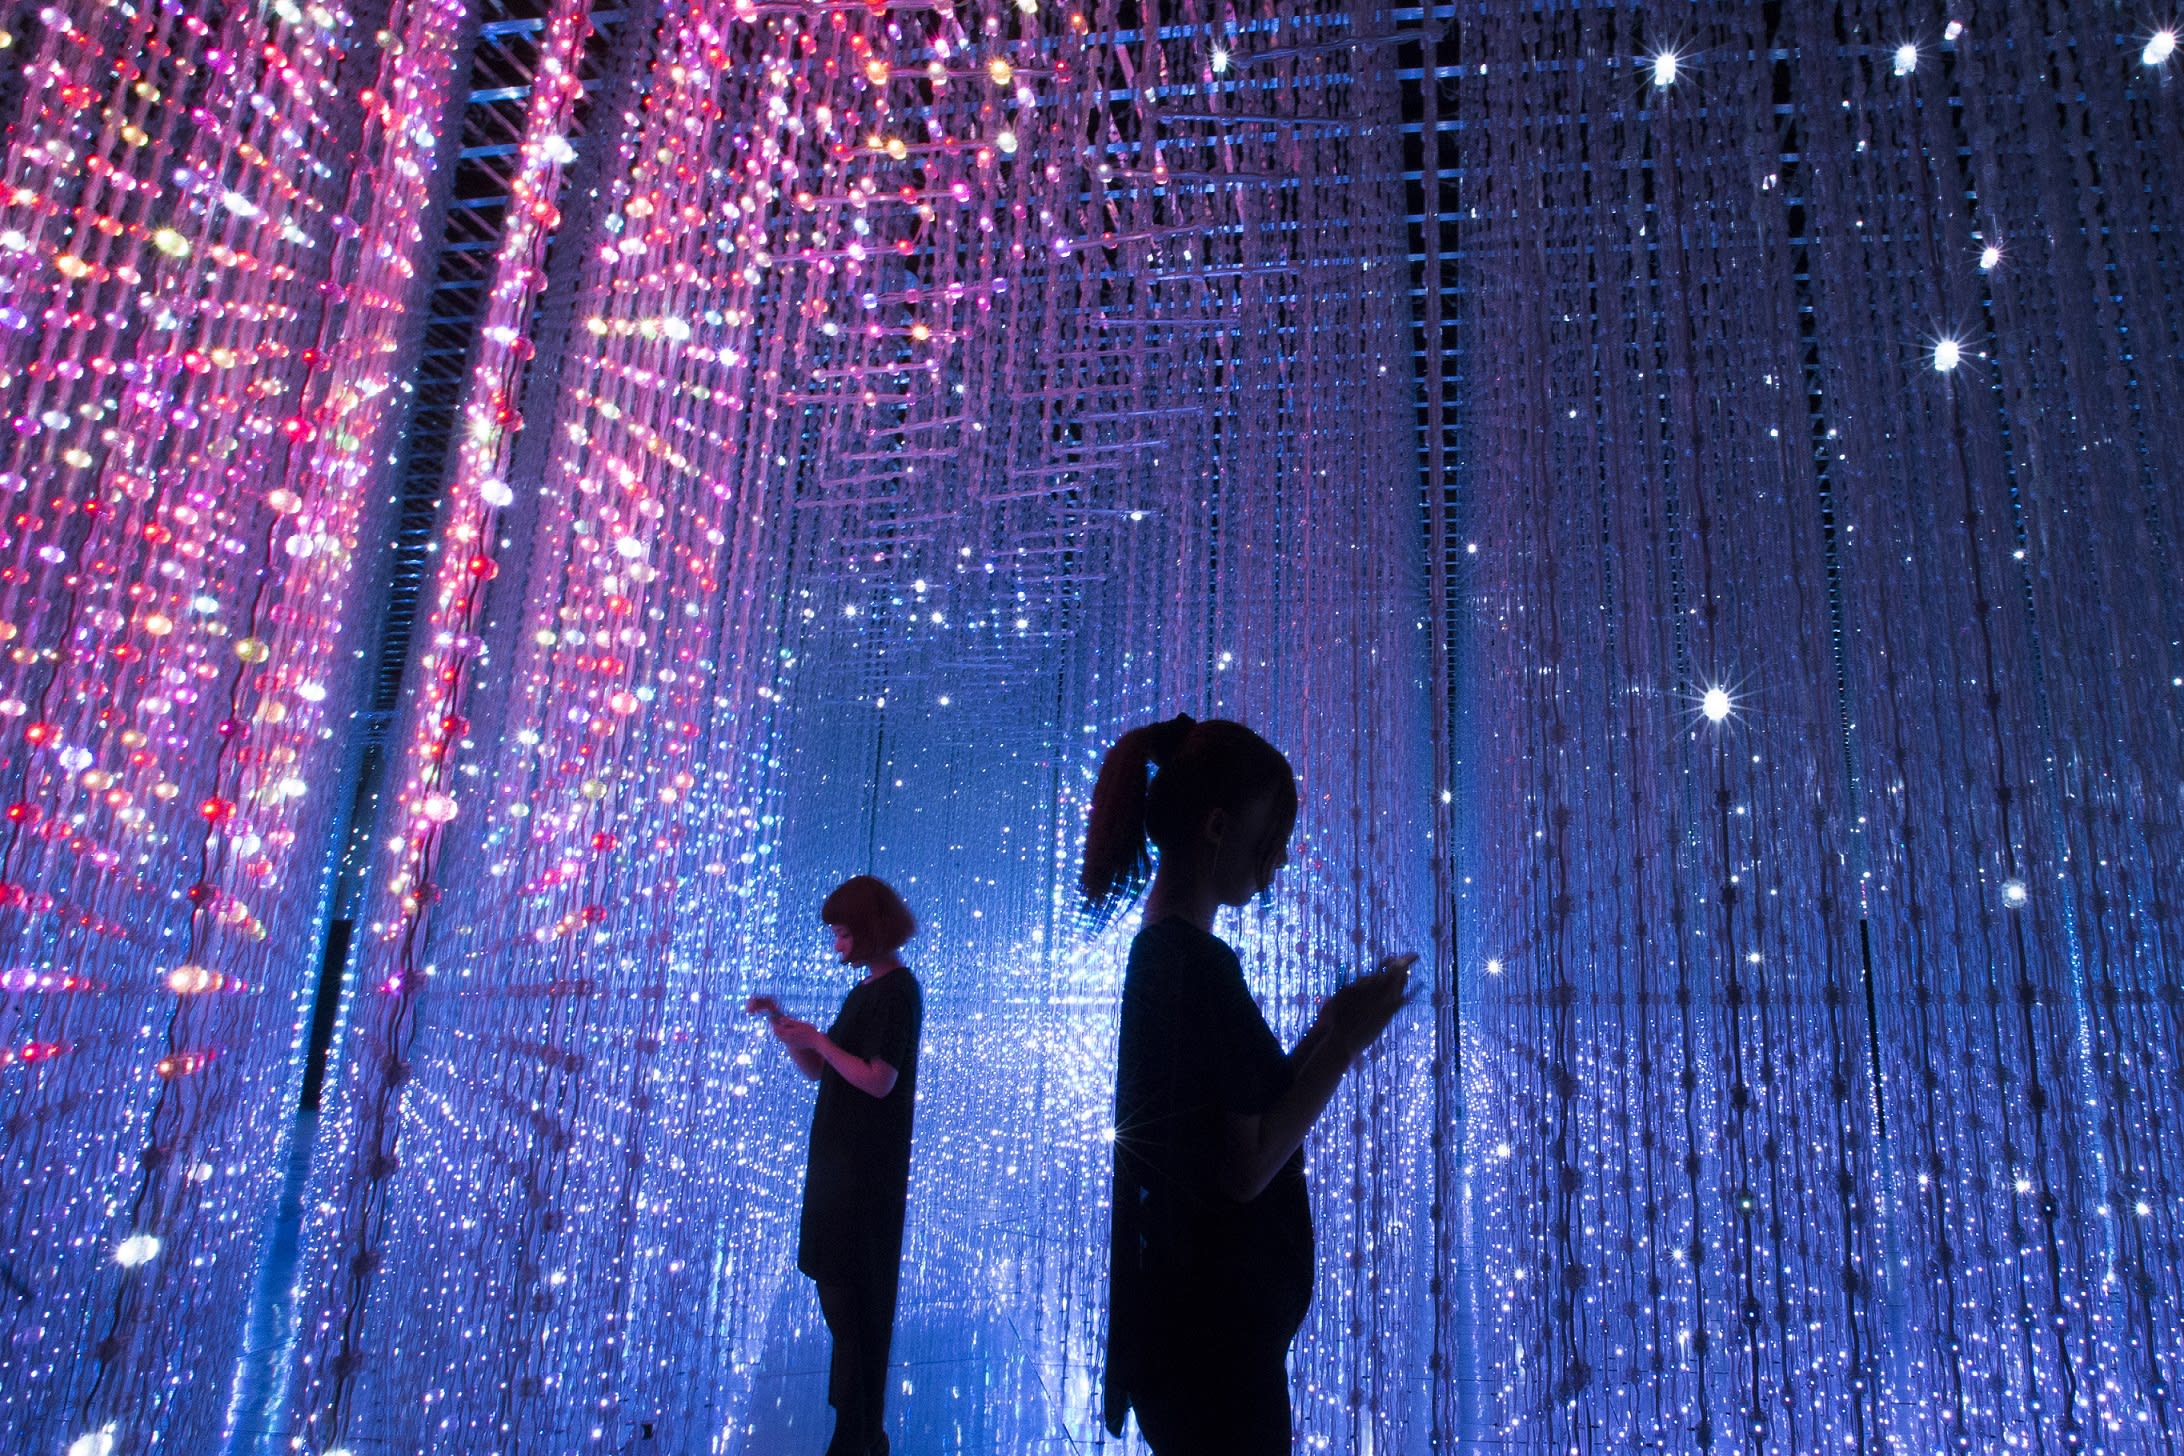 There Are New Exhibits At TeamLab’s Future World Exhibition At ArtScience Museum